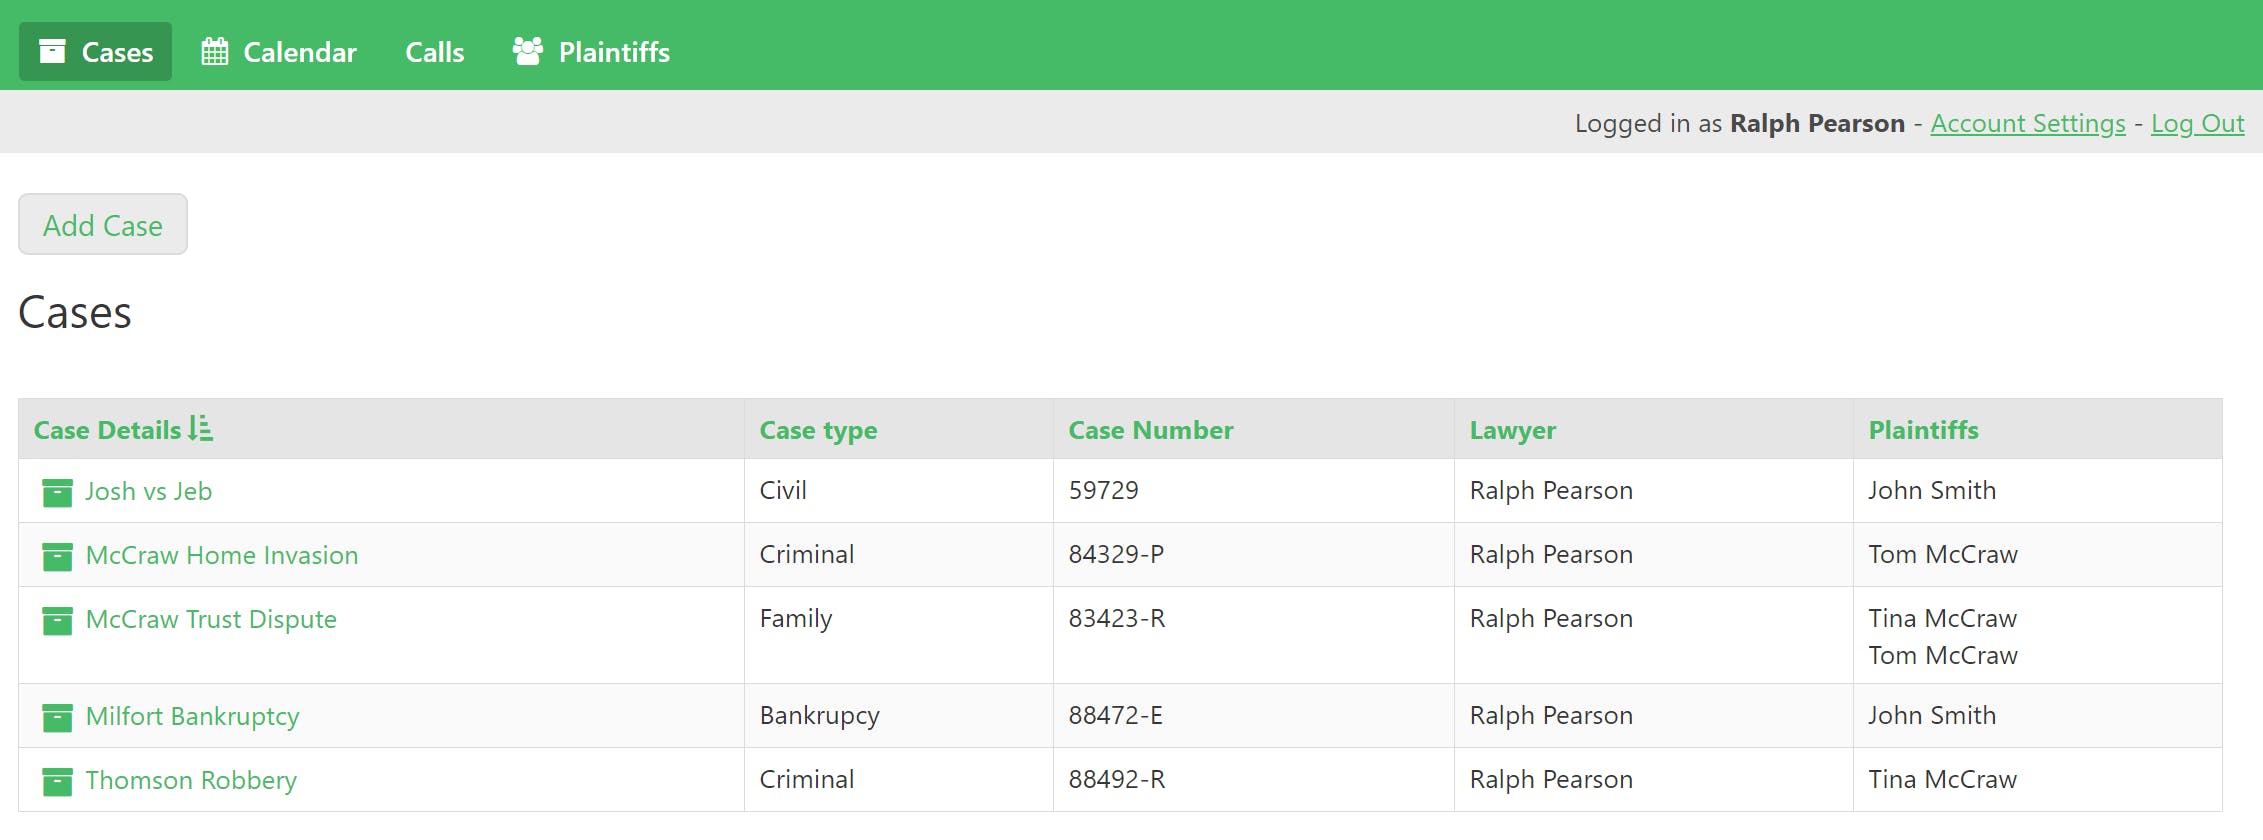 Lawyers log into the app where they immediately see their cases. They can then navigate to other parts of the portal.